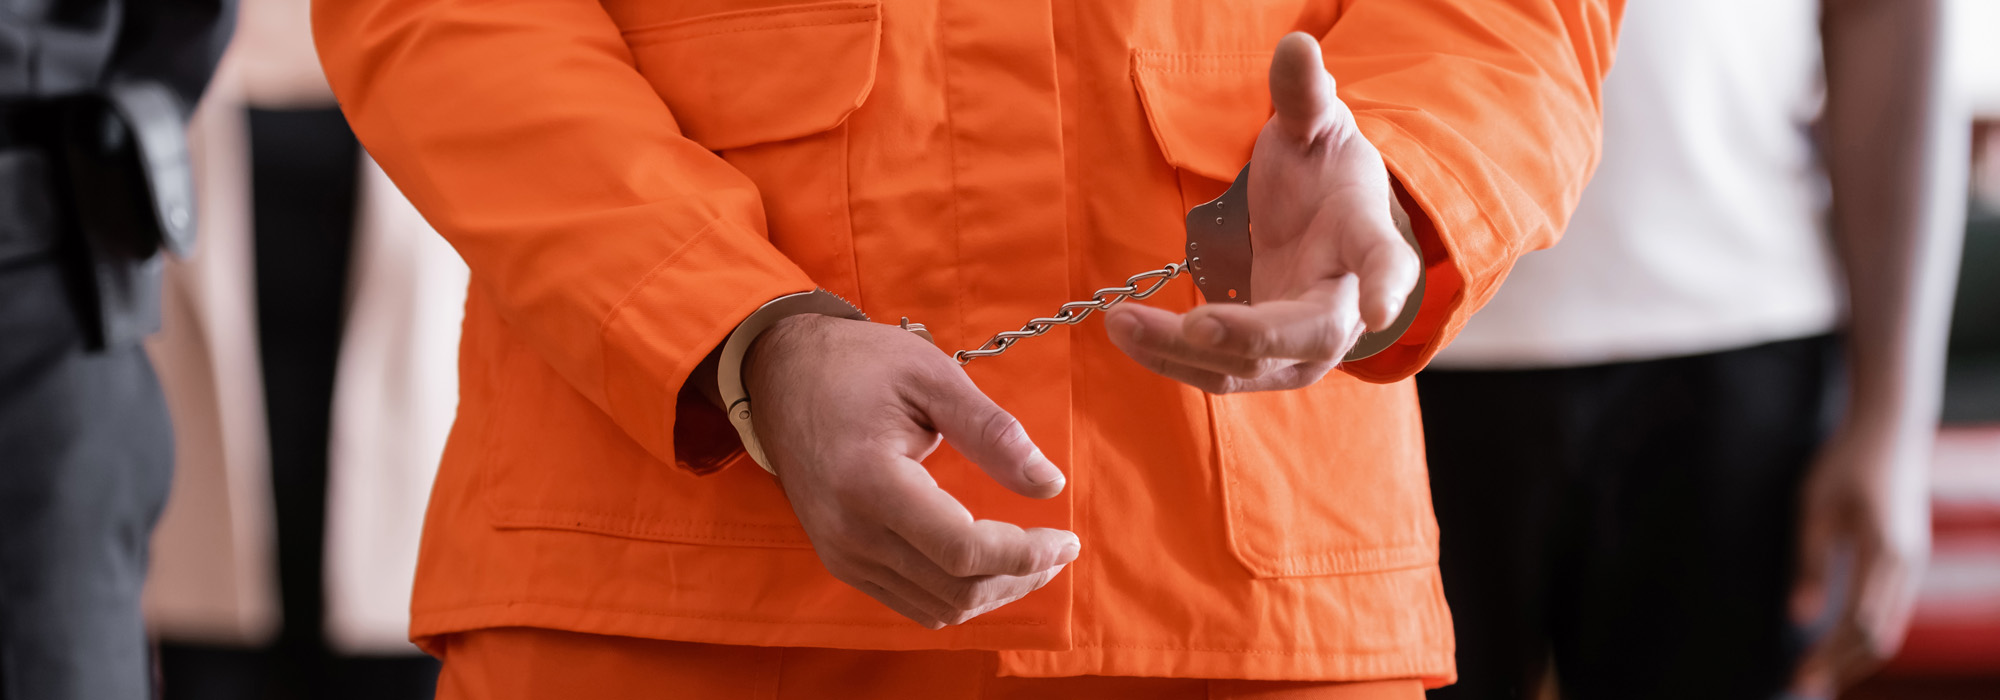 A person wearing an orange jumpsuit is shown from the shoulders down with their hands cuffed in front of them, connected by a chain. Other blurred figures can be seen in the background, possibly including an expungement lawyer focused on resolving their case.